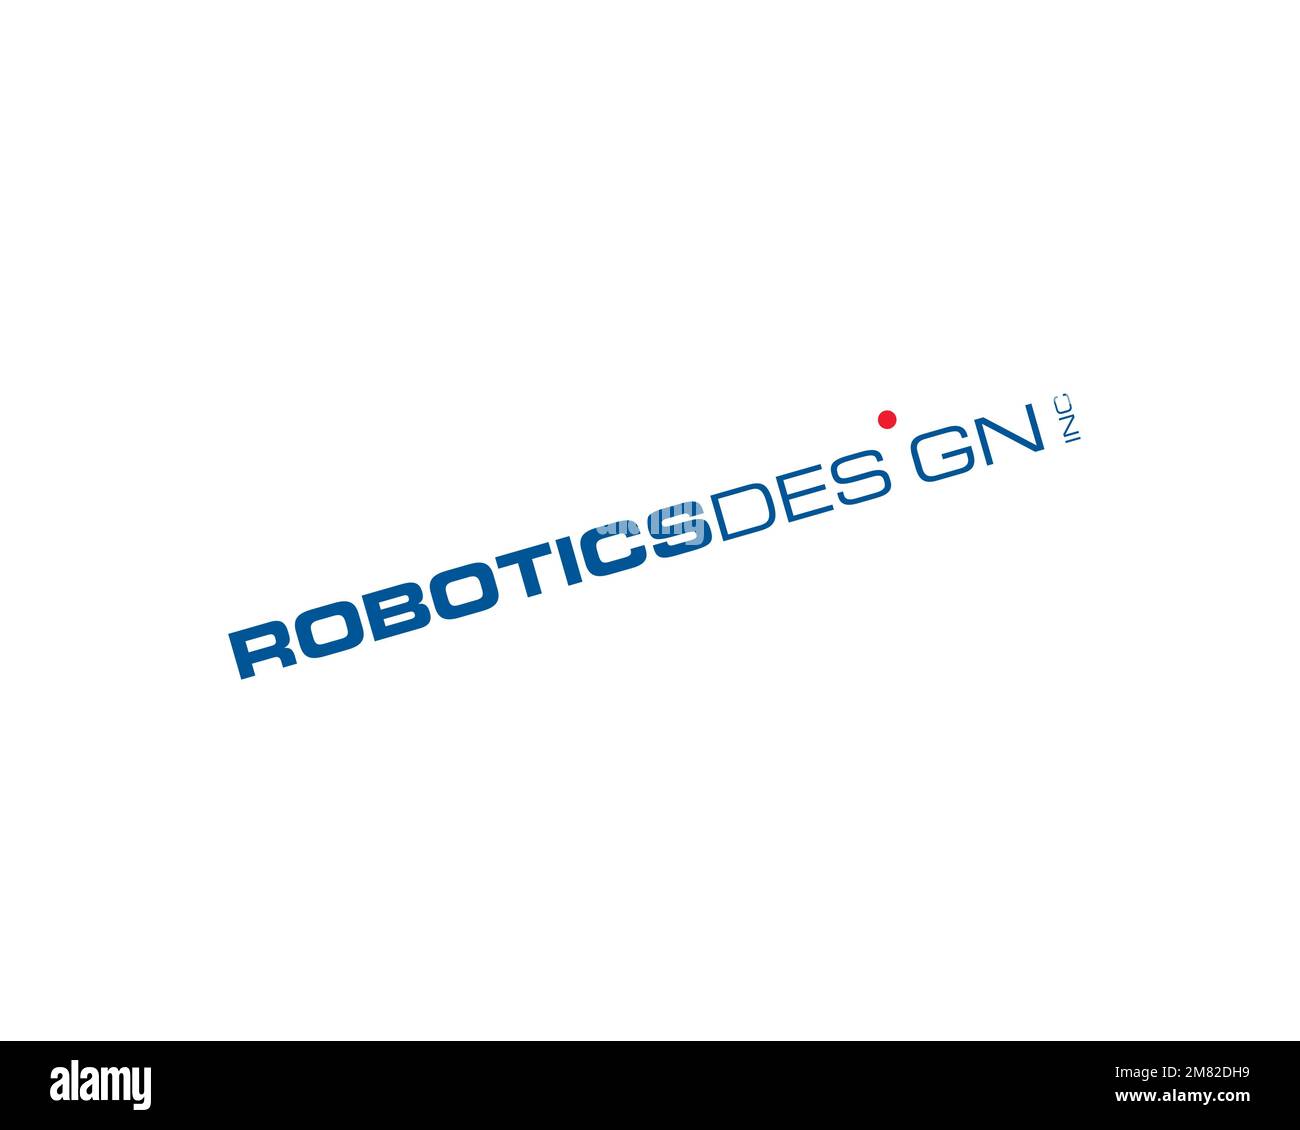 Robotics logo Cut Out Stock Images & Pictures - Page 3 - Alamy